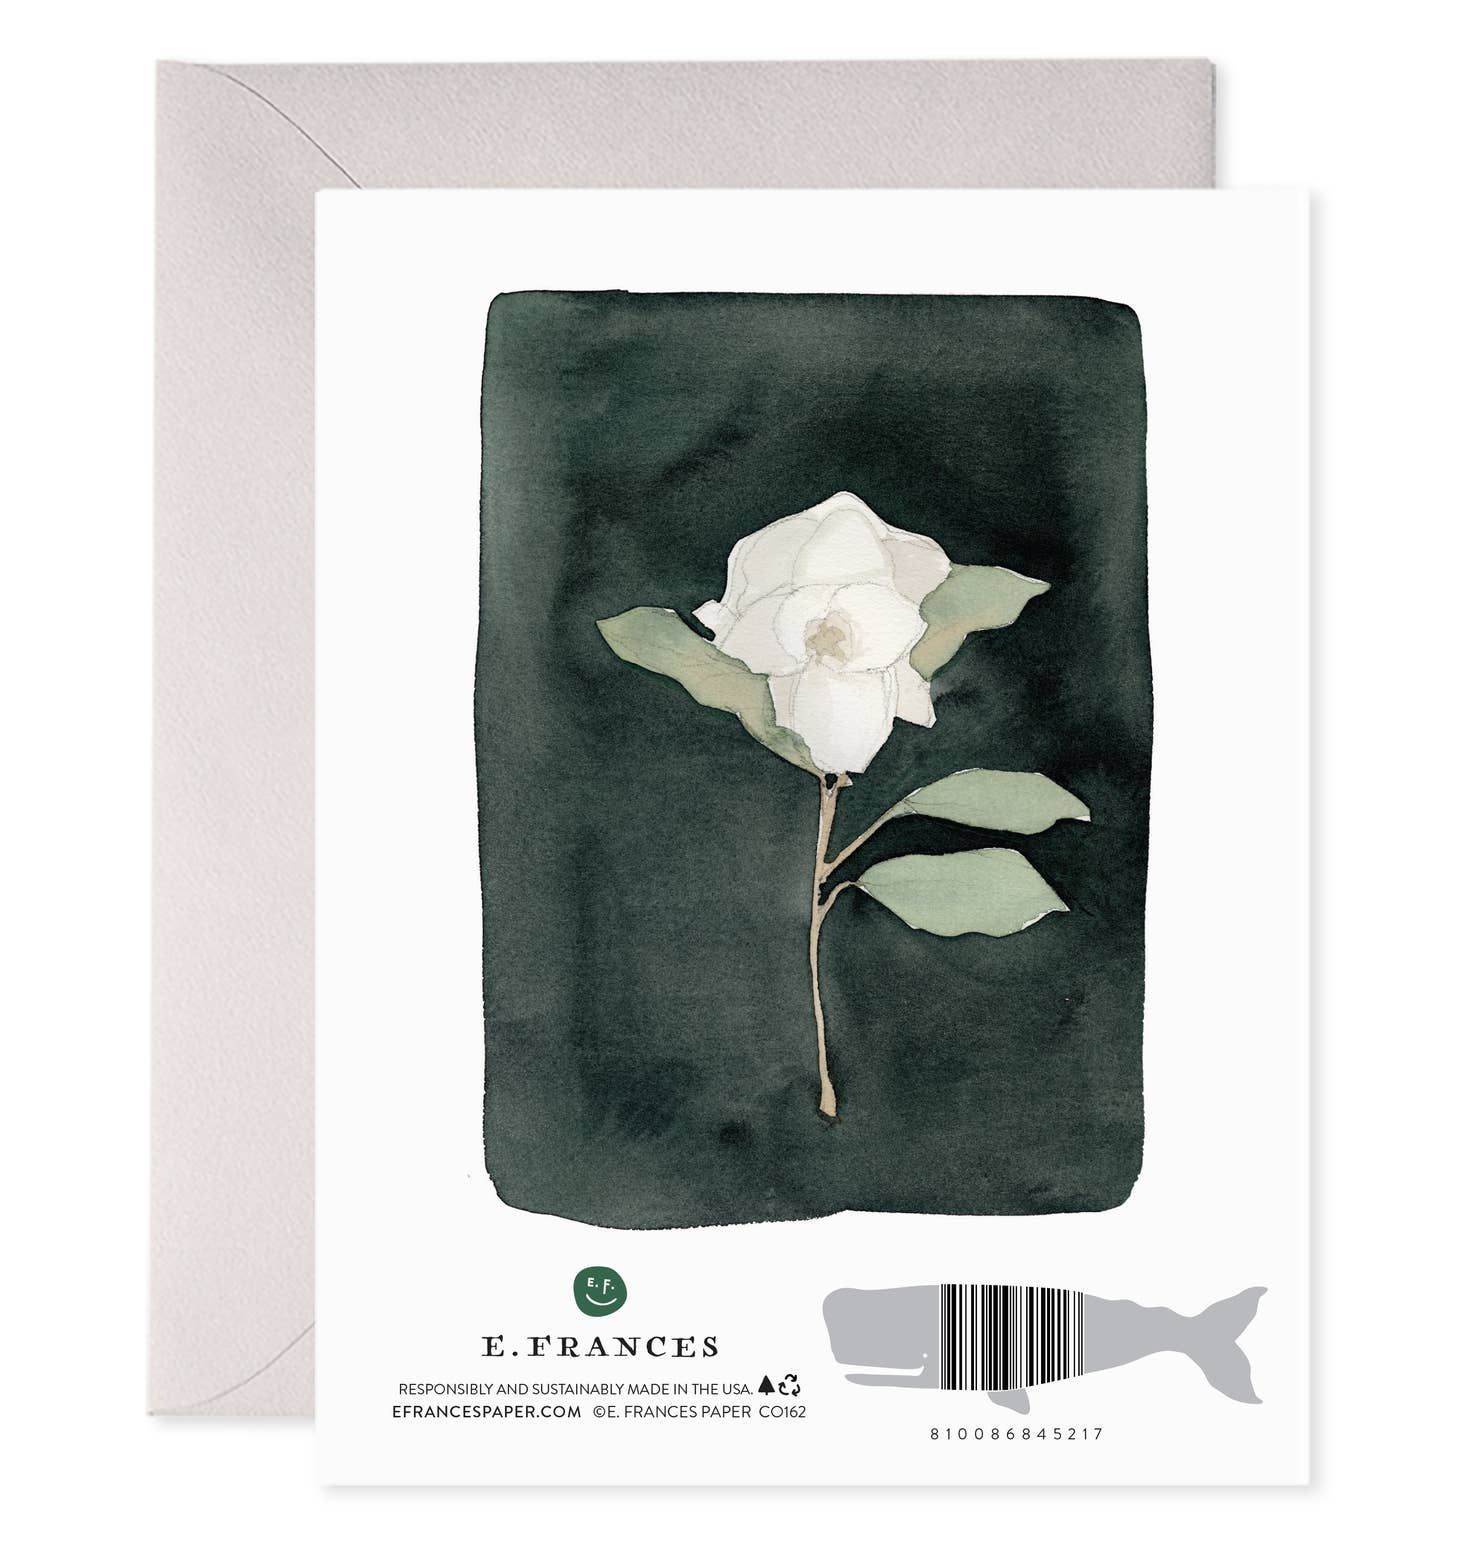 White border with black background and image of white flower with pale green leaves. Grey envelope is included. 